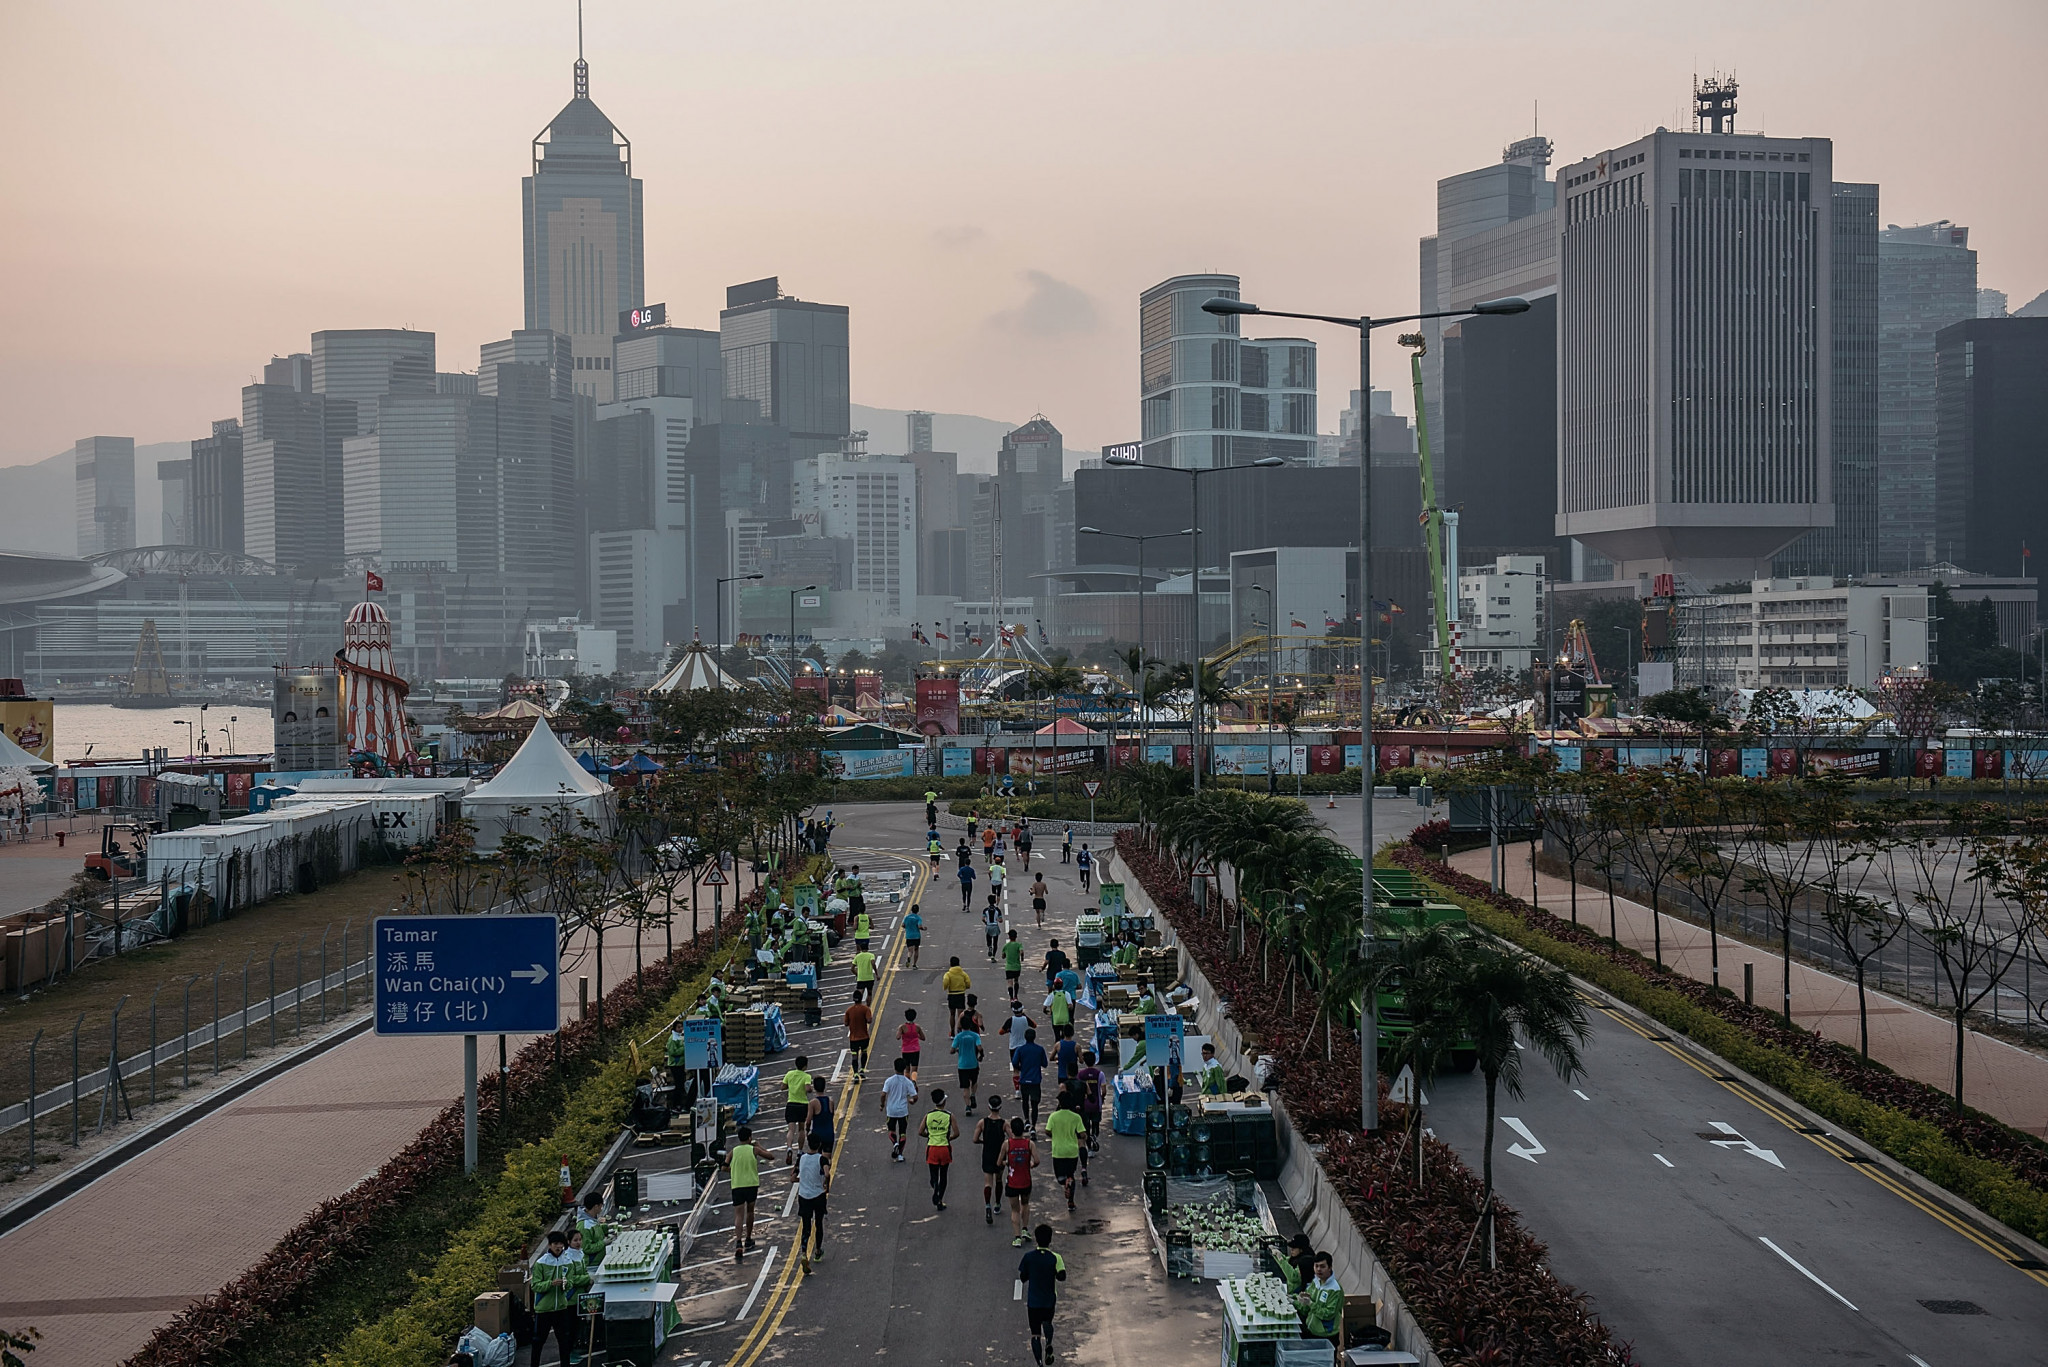 The Hong Kong Marathon was cancelled this year due to the coronavirus pandemic and the 2021 race has now been postponed to October ©Getty Images